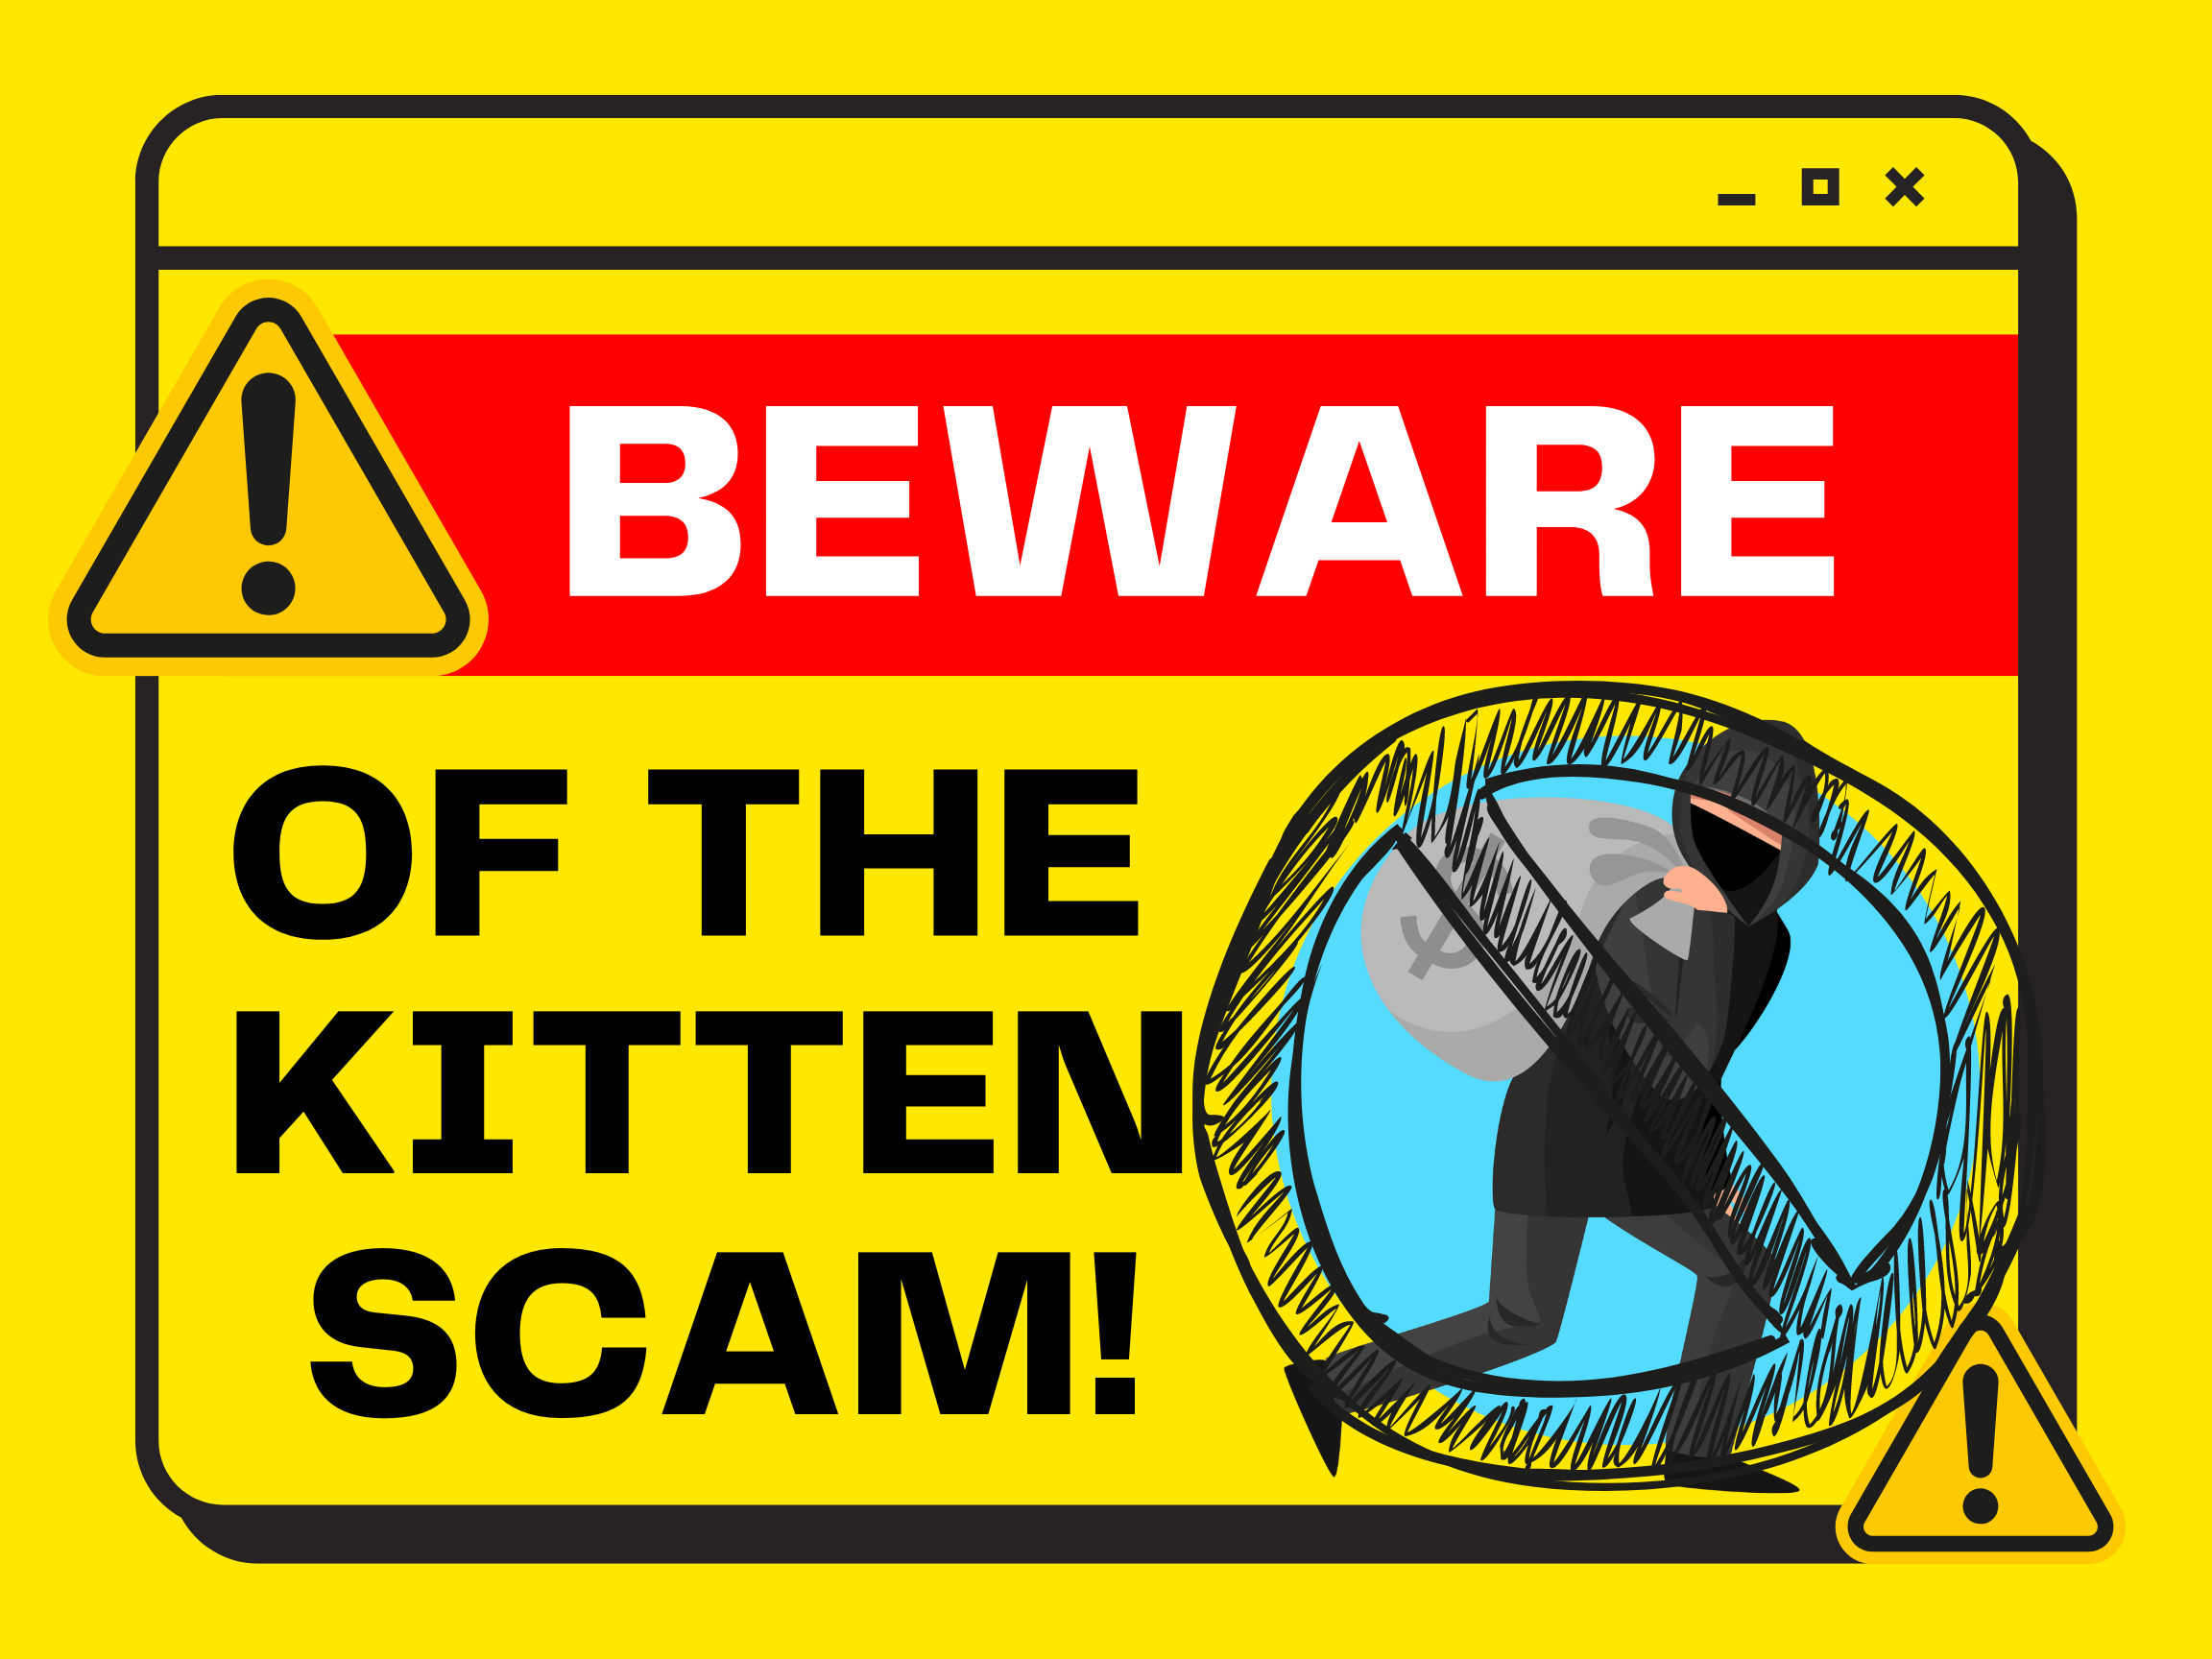 Yellow sign of a thief stealing money, with the words "beware of the kitten scam!"